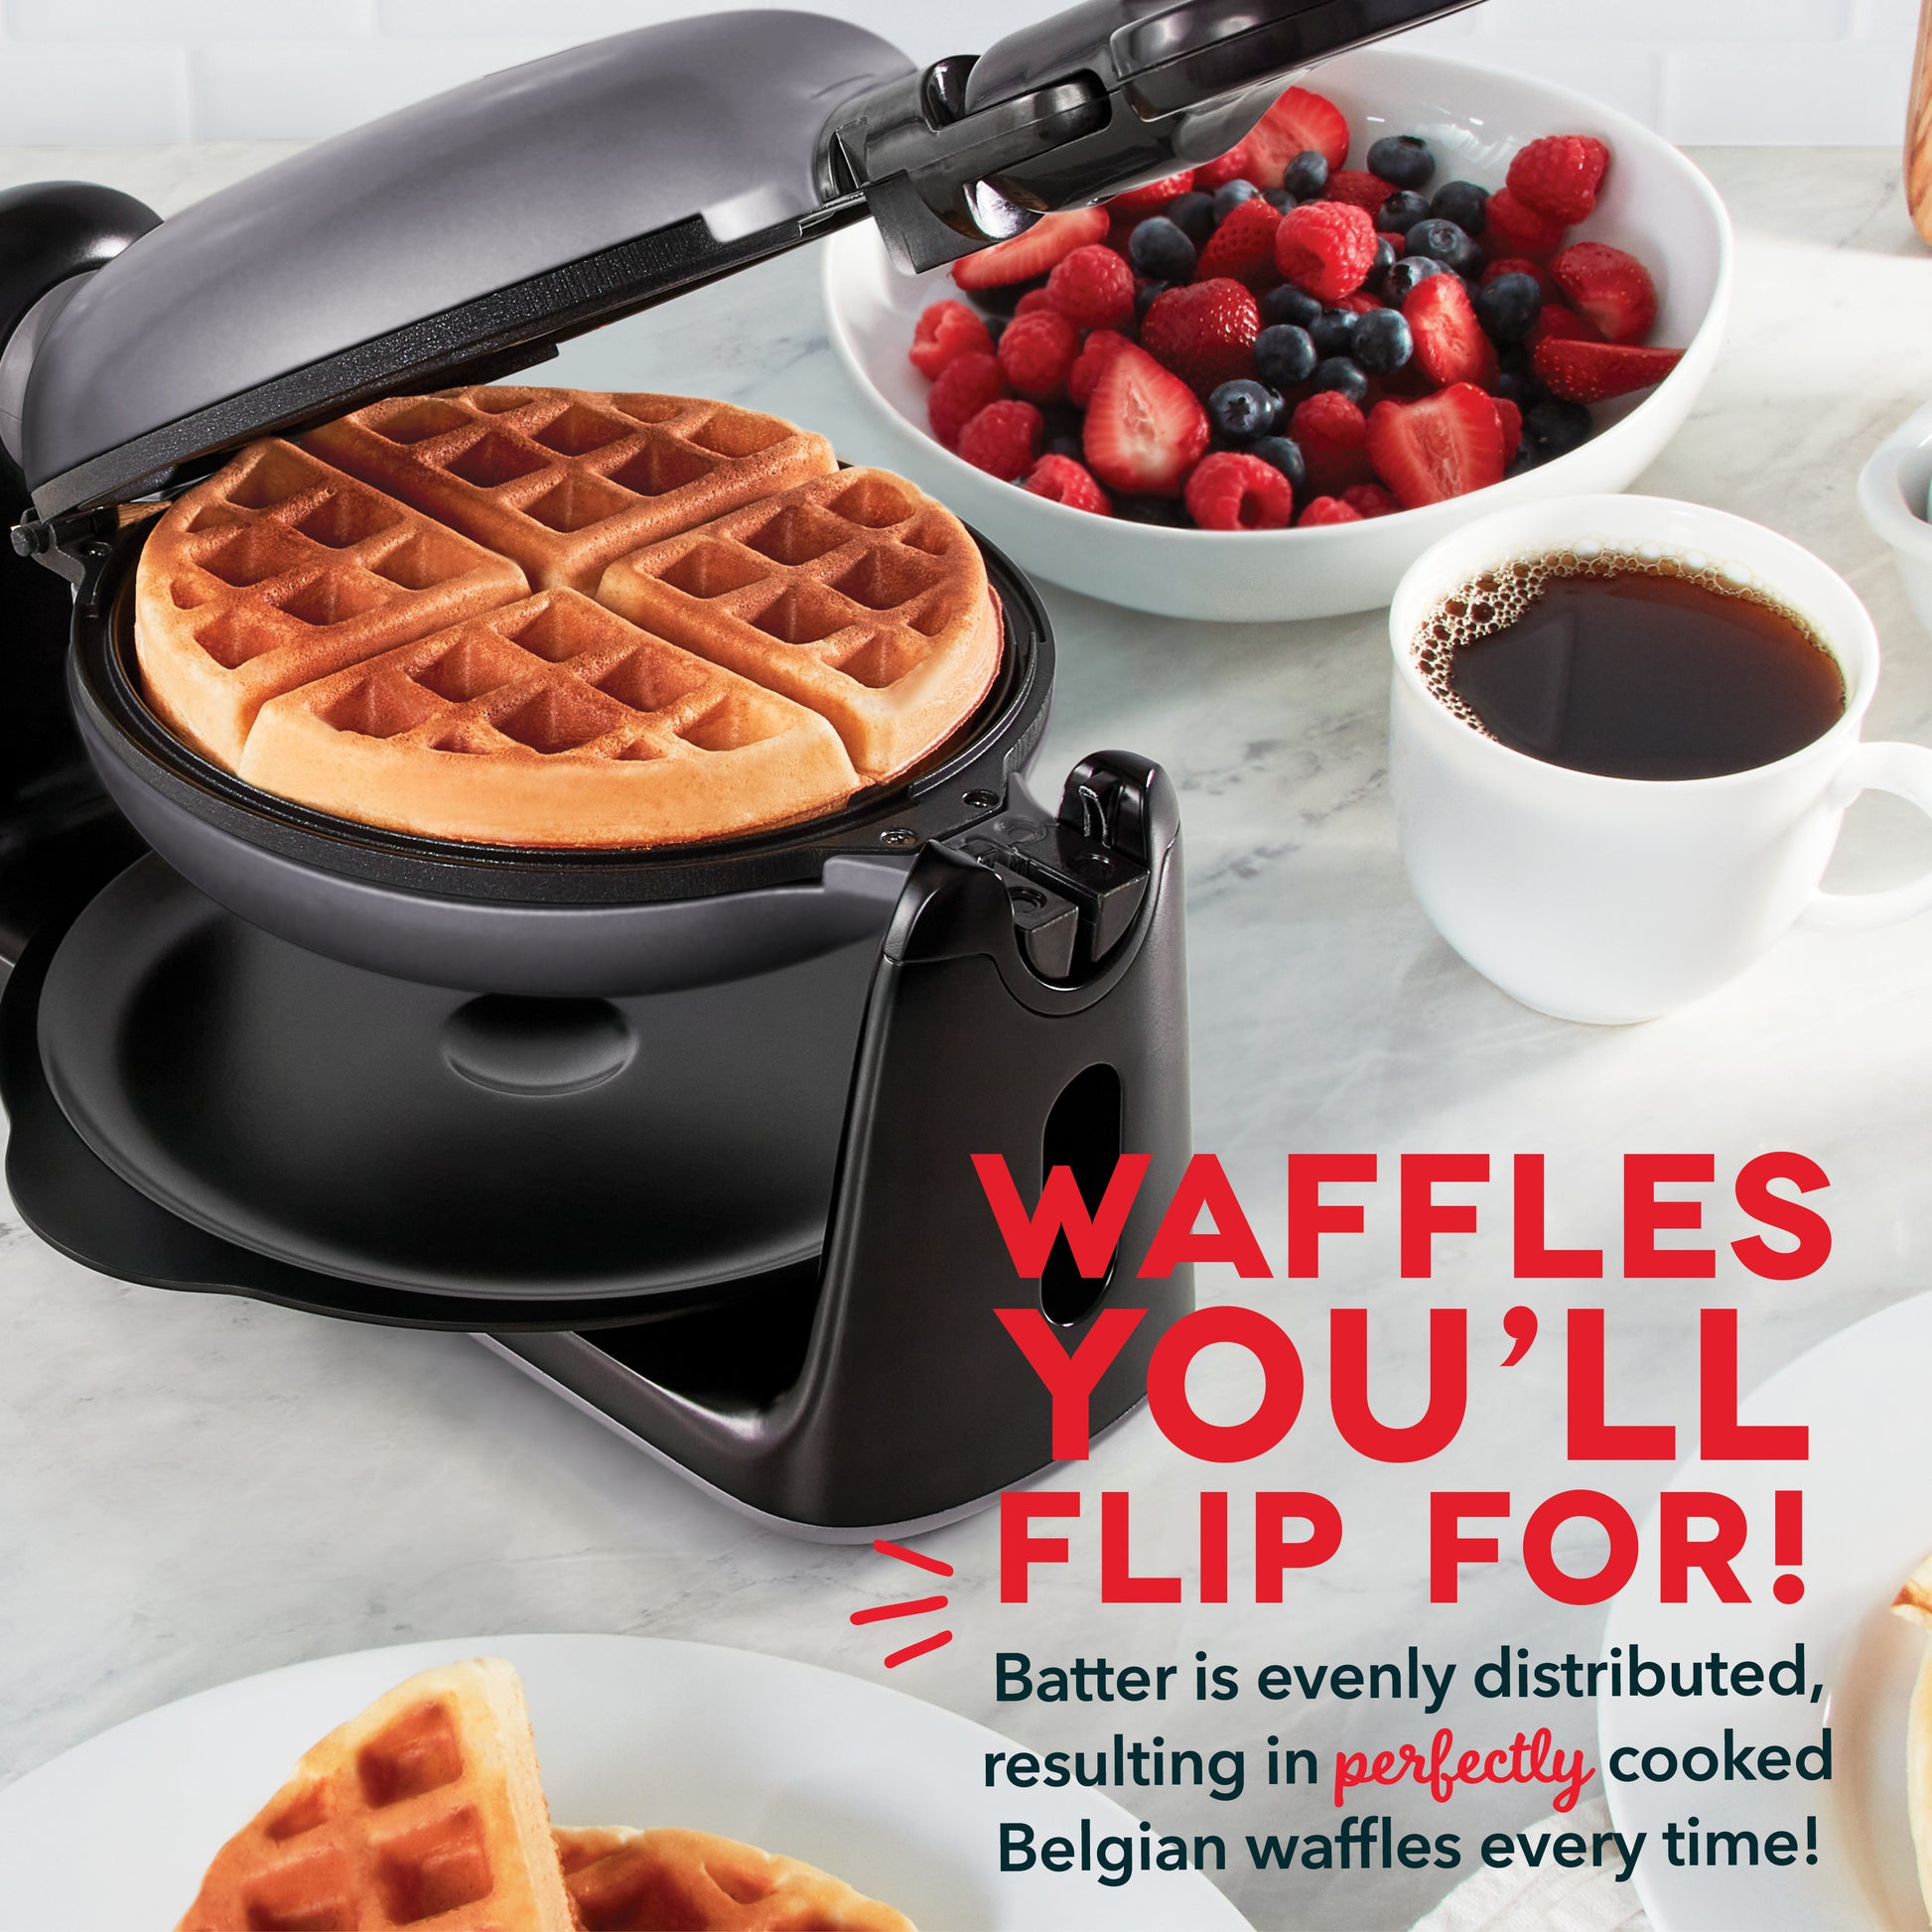 DASH Flip Belgian Waffle Maker With Non-Stick Coating for Individual 1  Thick Waffles – Aqua